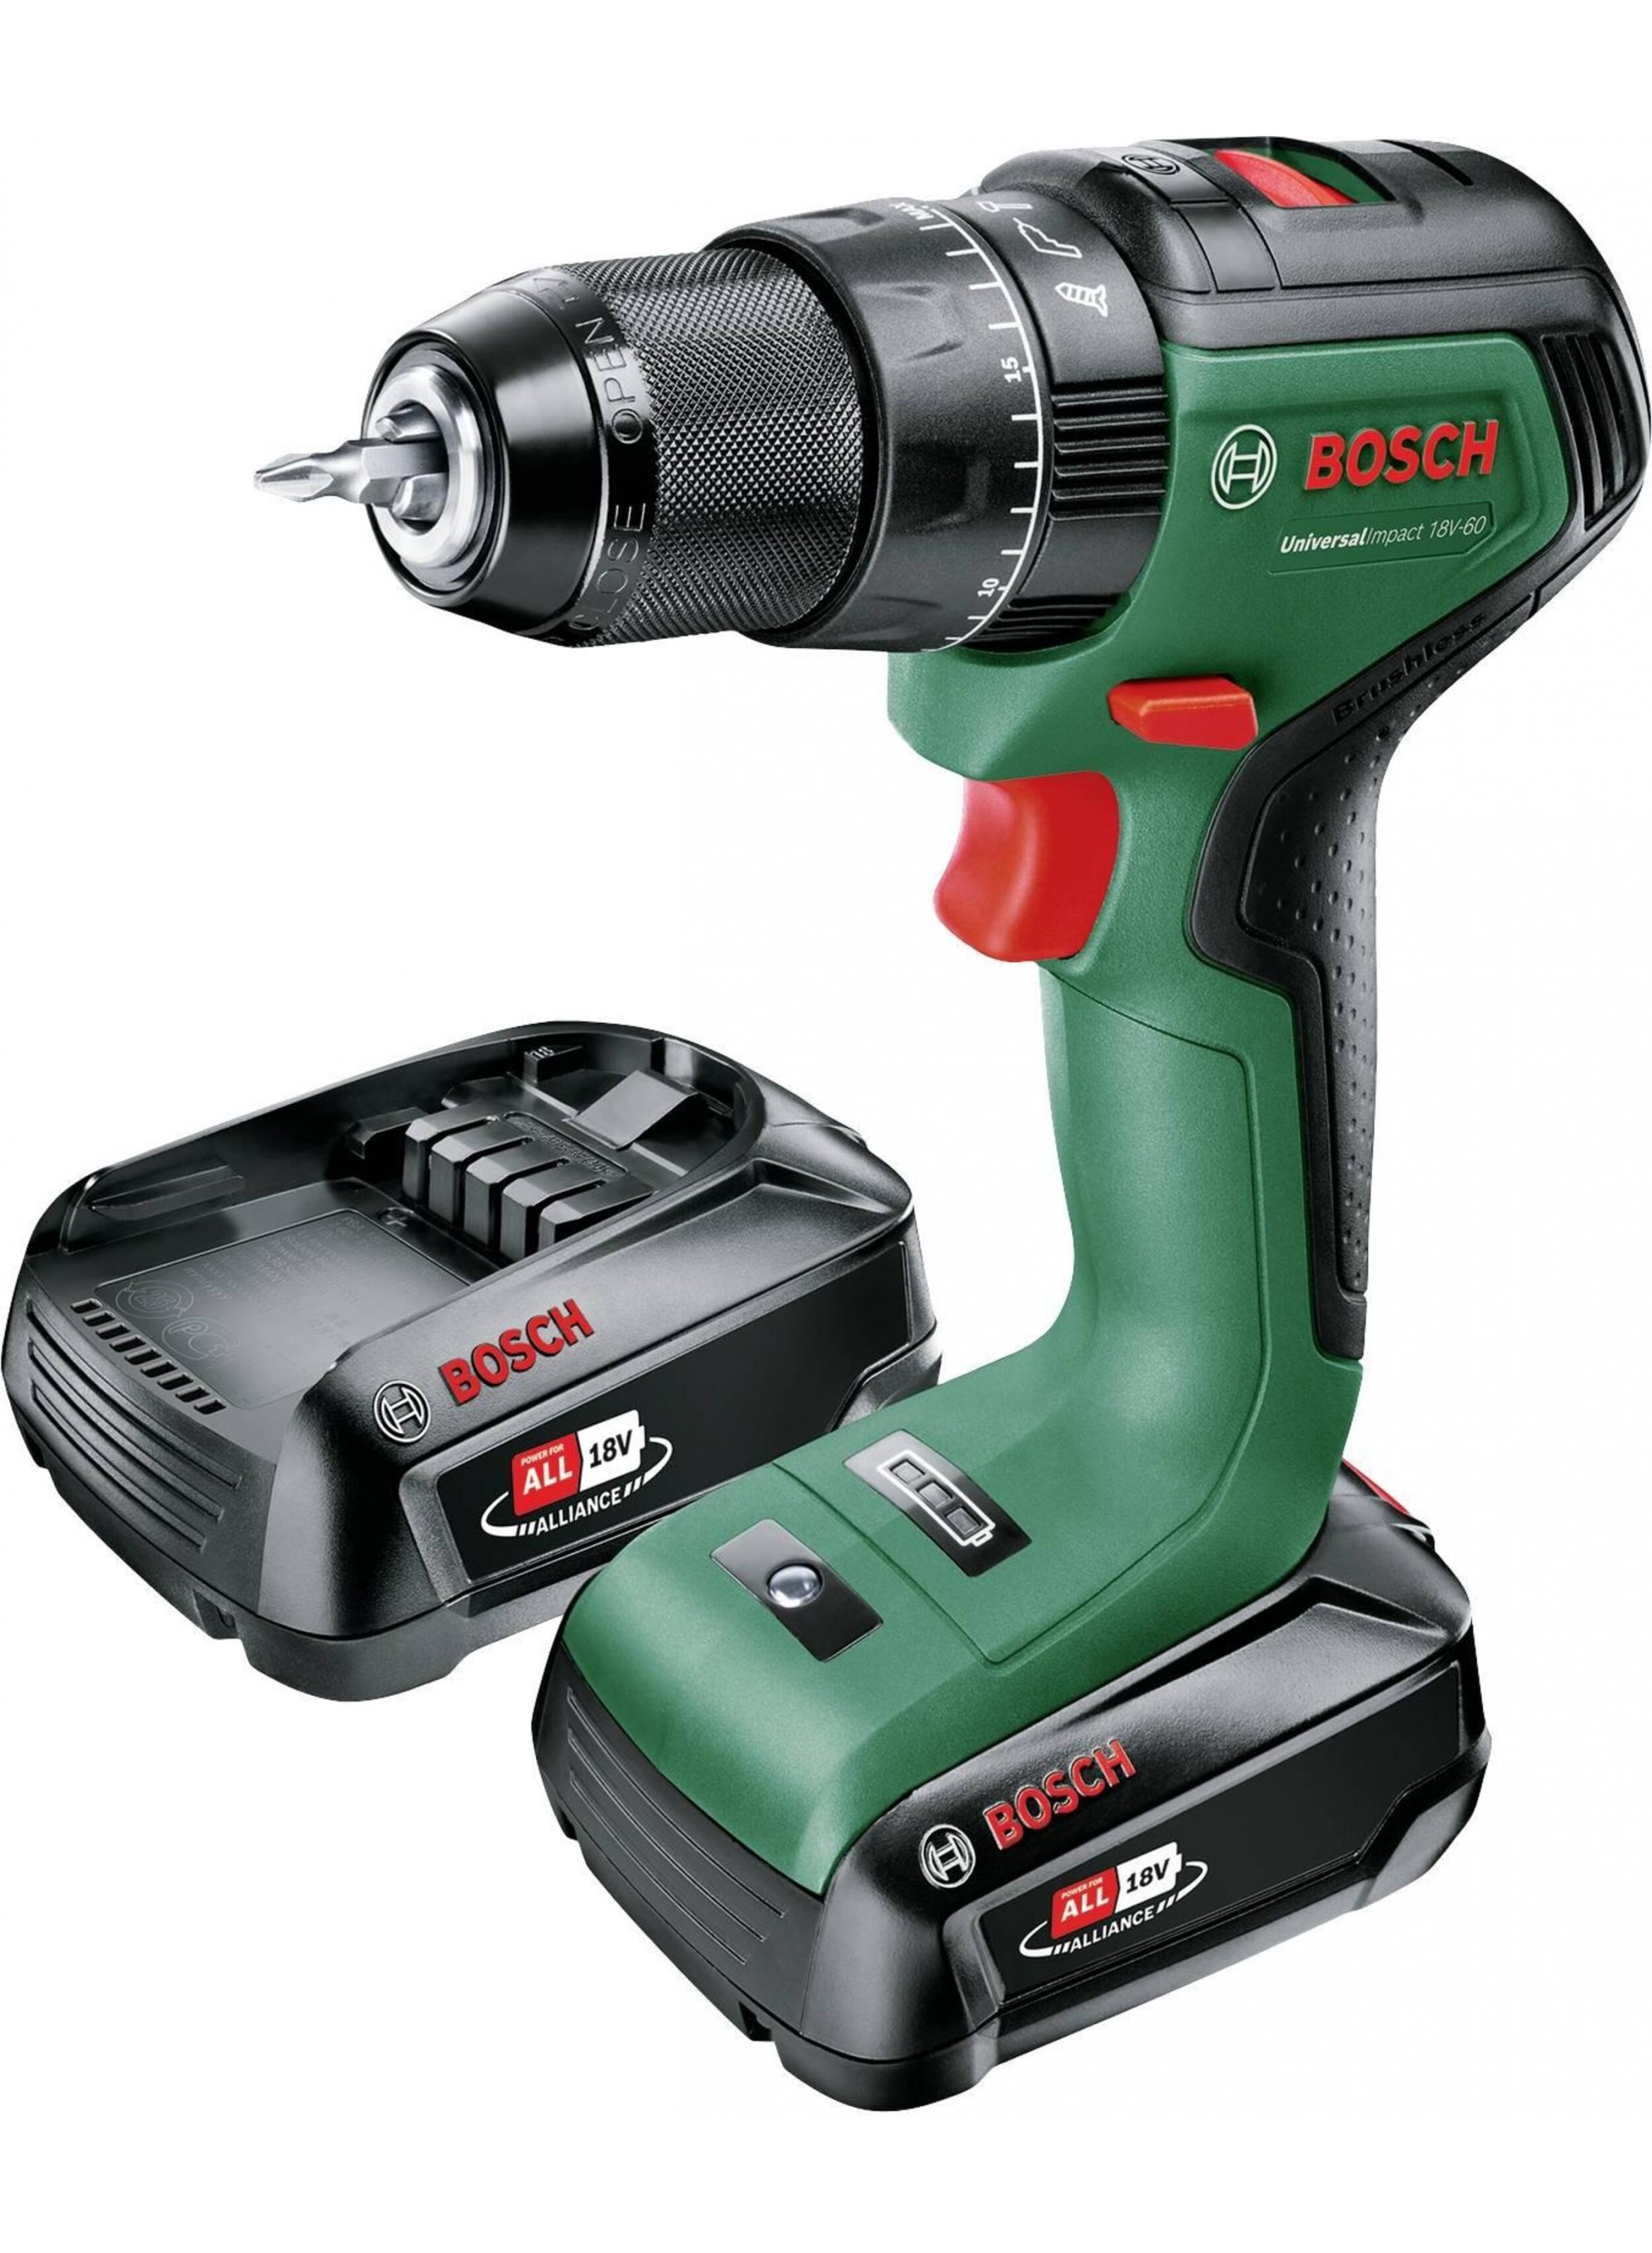 BOSCH UNIVERSALIMPACT 18V-60 CORDLESS HAMMER DRILL WITH TWO POSITIONS IN CASE (2X 2.0AH Battery)